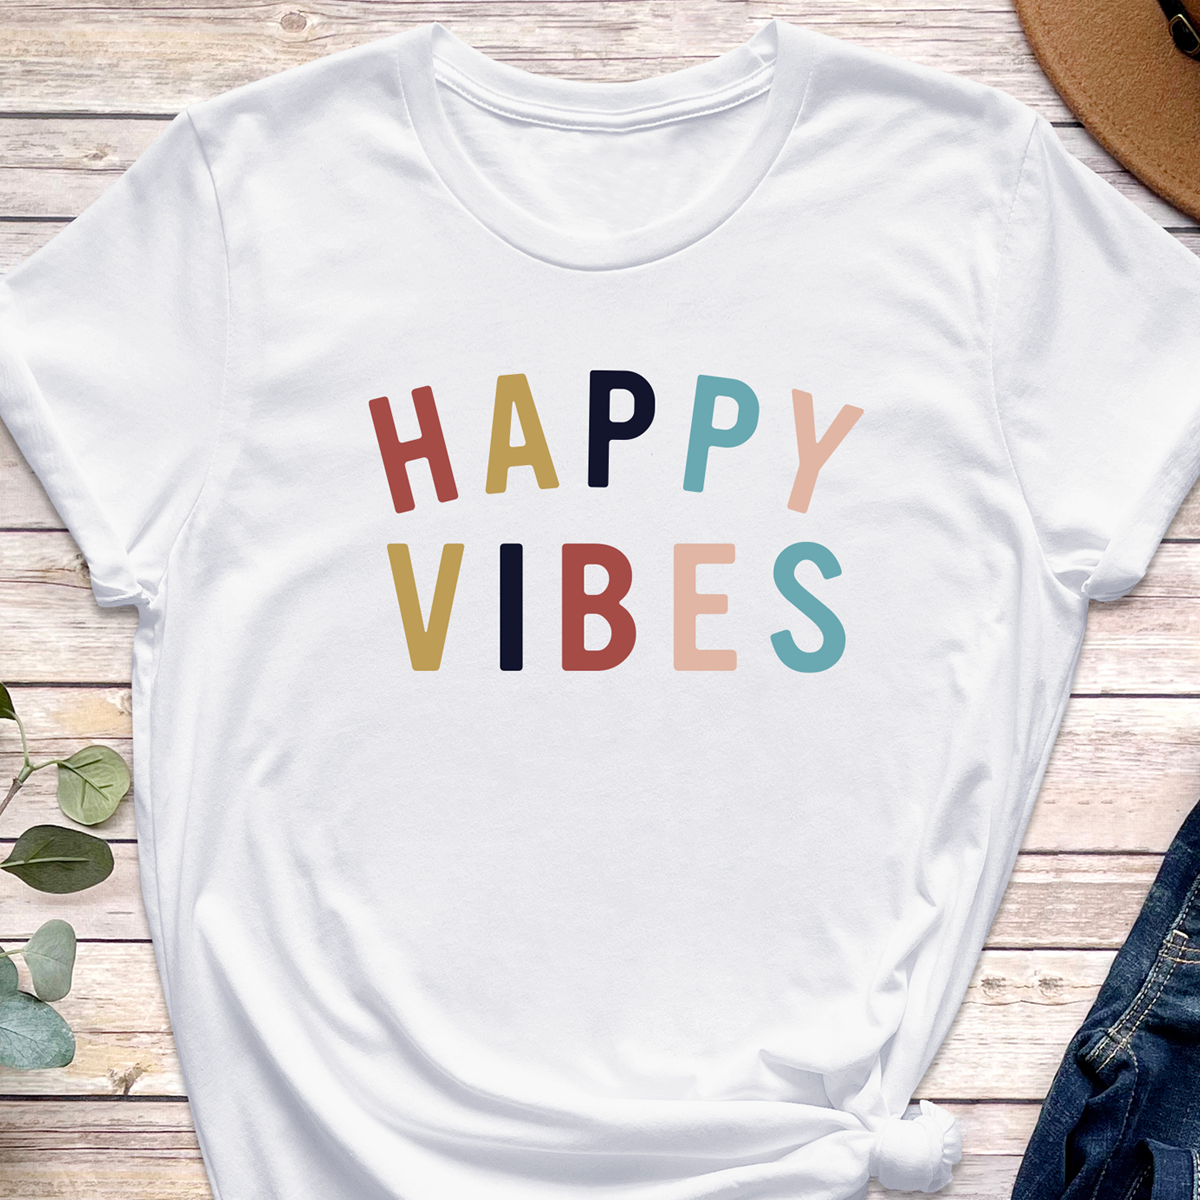 Happy Office Tee Out Brands Vibes - Of